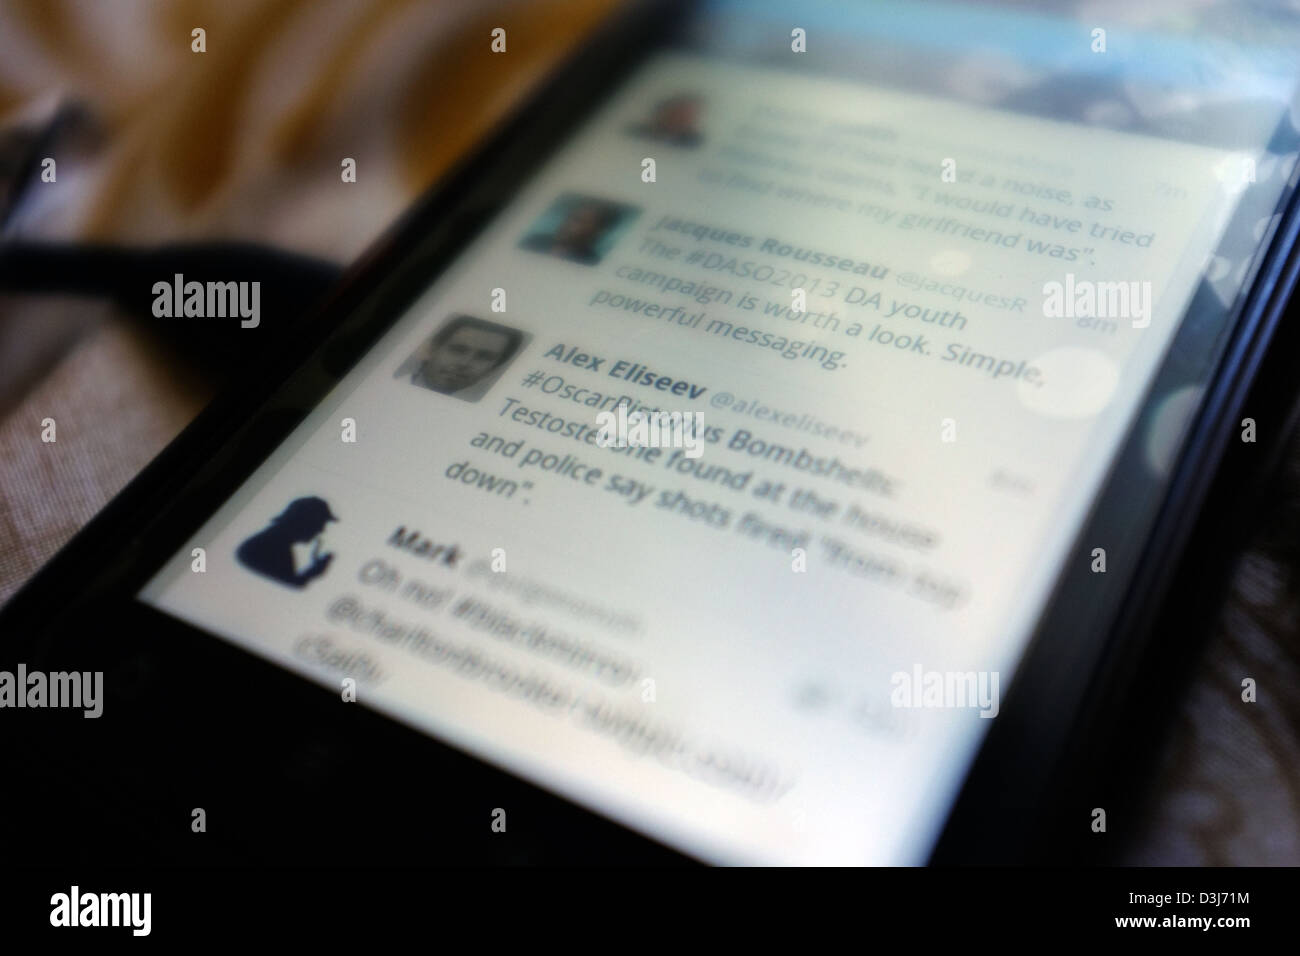 A smart phone screen showing the twitter reports regarding Oscar Pistorius and his murder trial in South Africa in 2013. Stock Photo